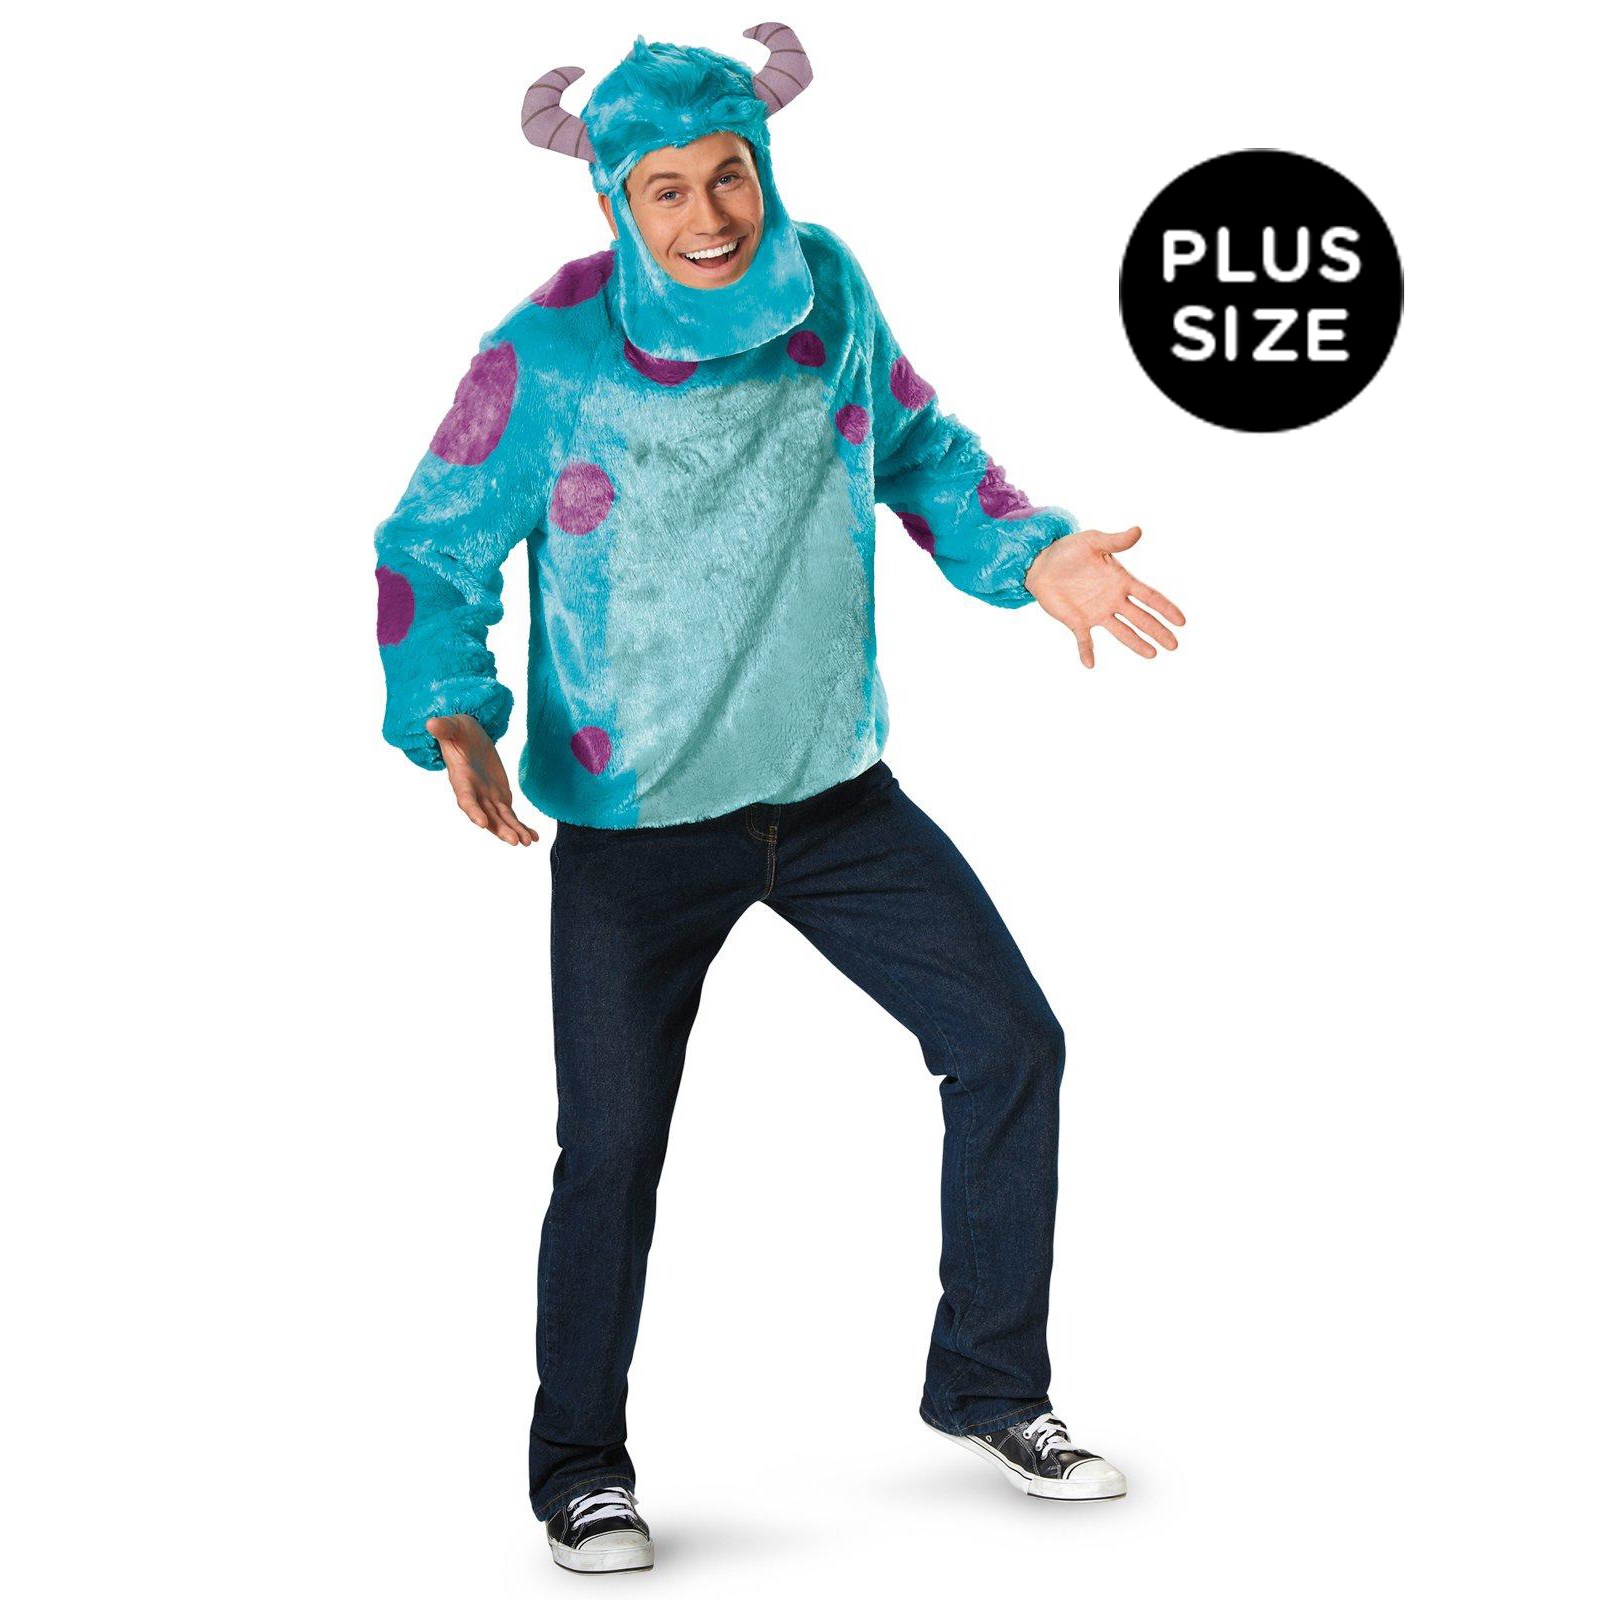 Monsters University Sulley Deluxe Plus Adult Costume